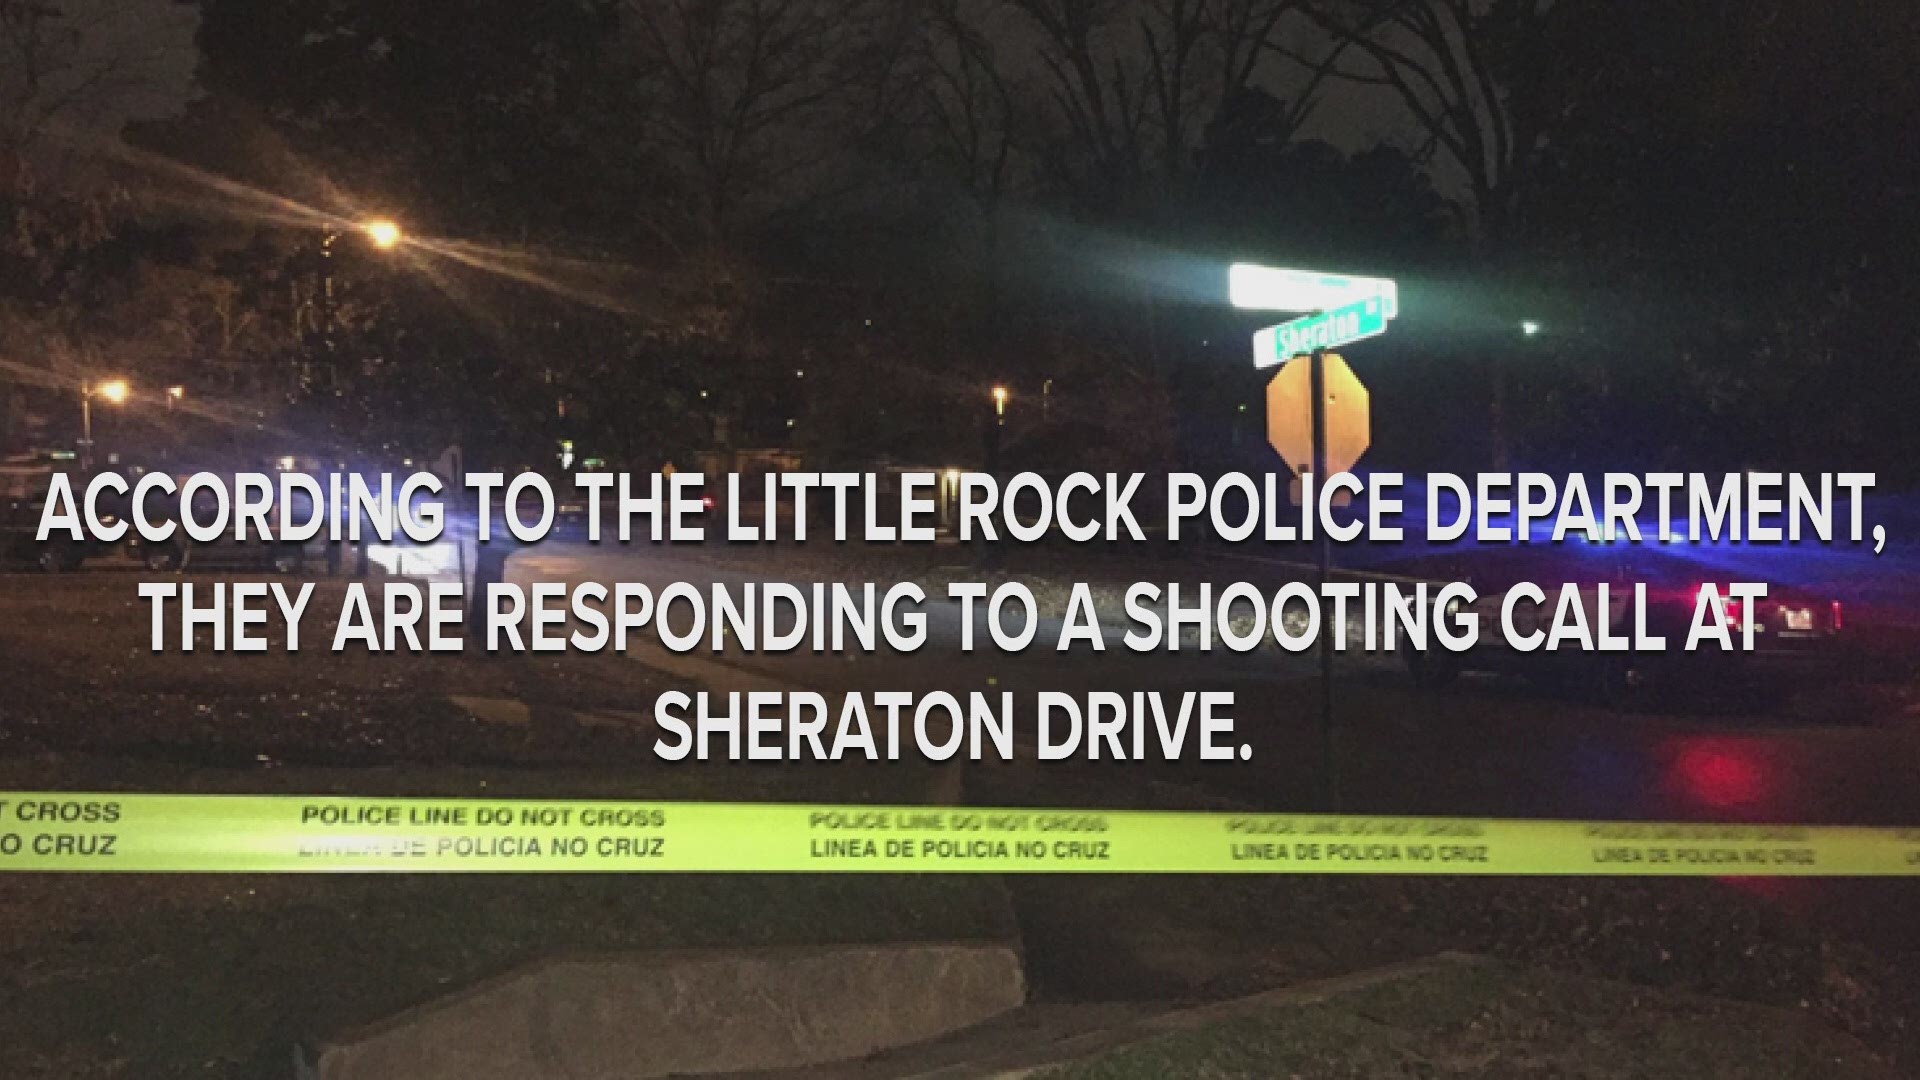 According to the Little Rock Police Department, they are responding to a shooting call at Sheraton Drive.